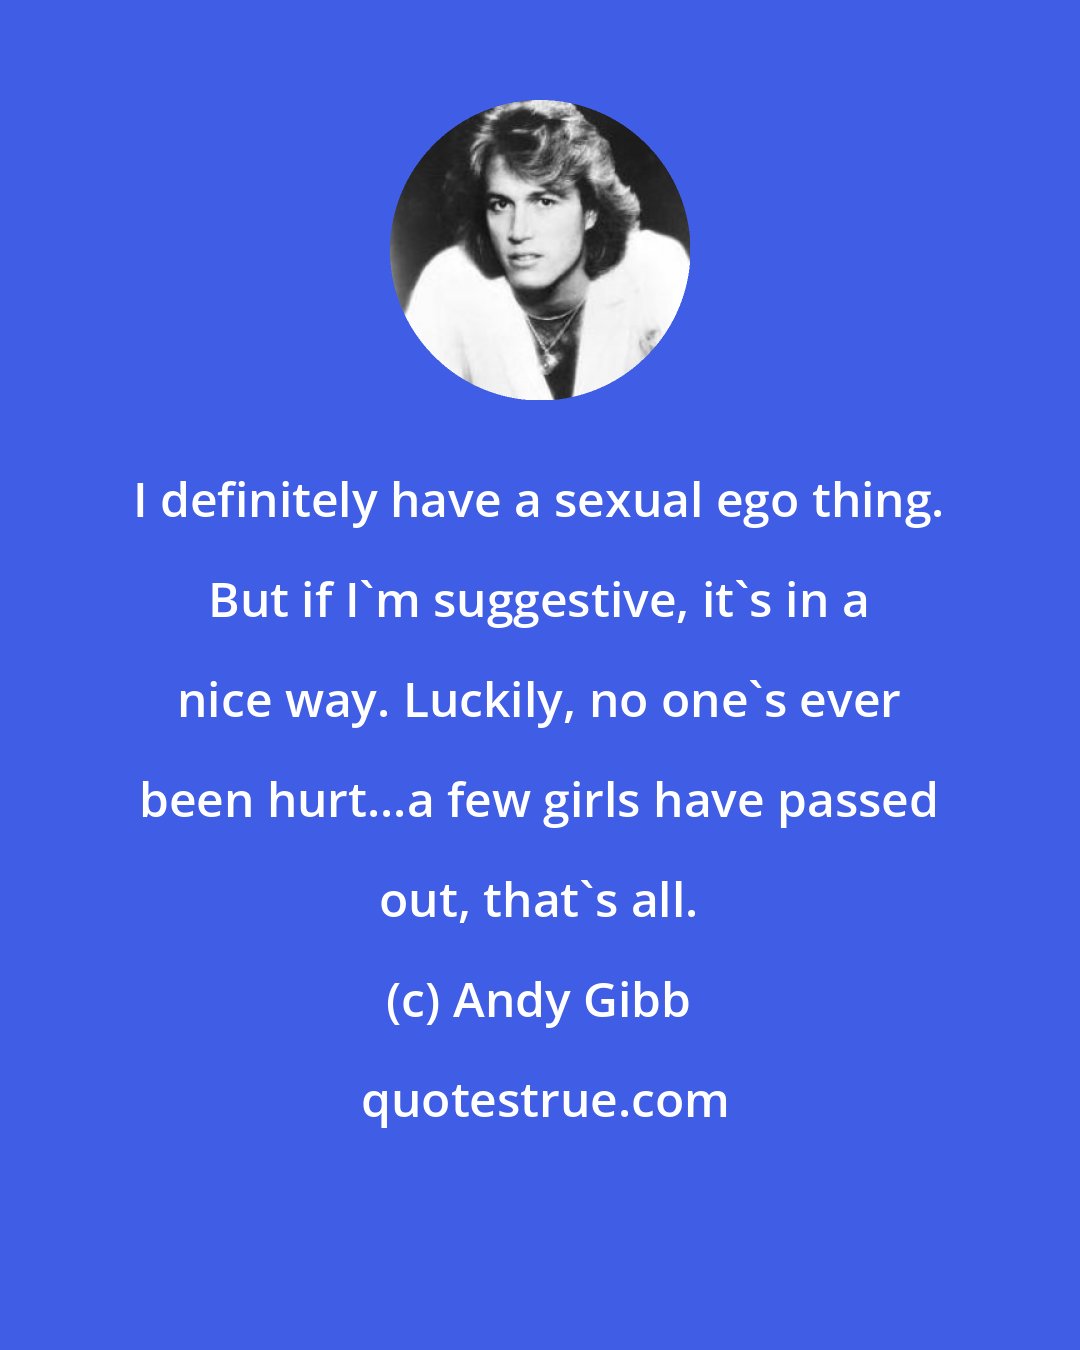 Andy Gibb: I definitely have a sexual ego thing. But if I'm suggestive, it's in a nice way. Luckily, no one's ever been hurt...a few girls have passed out, that's all.